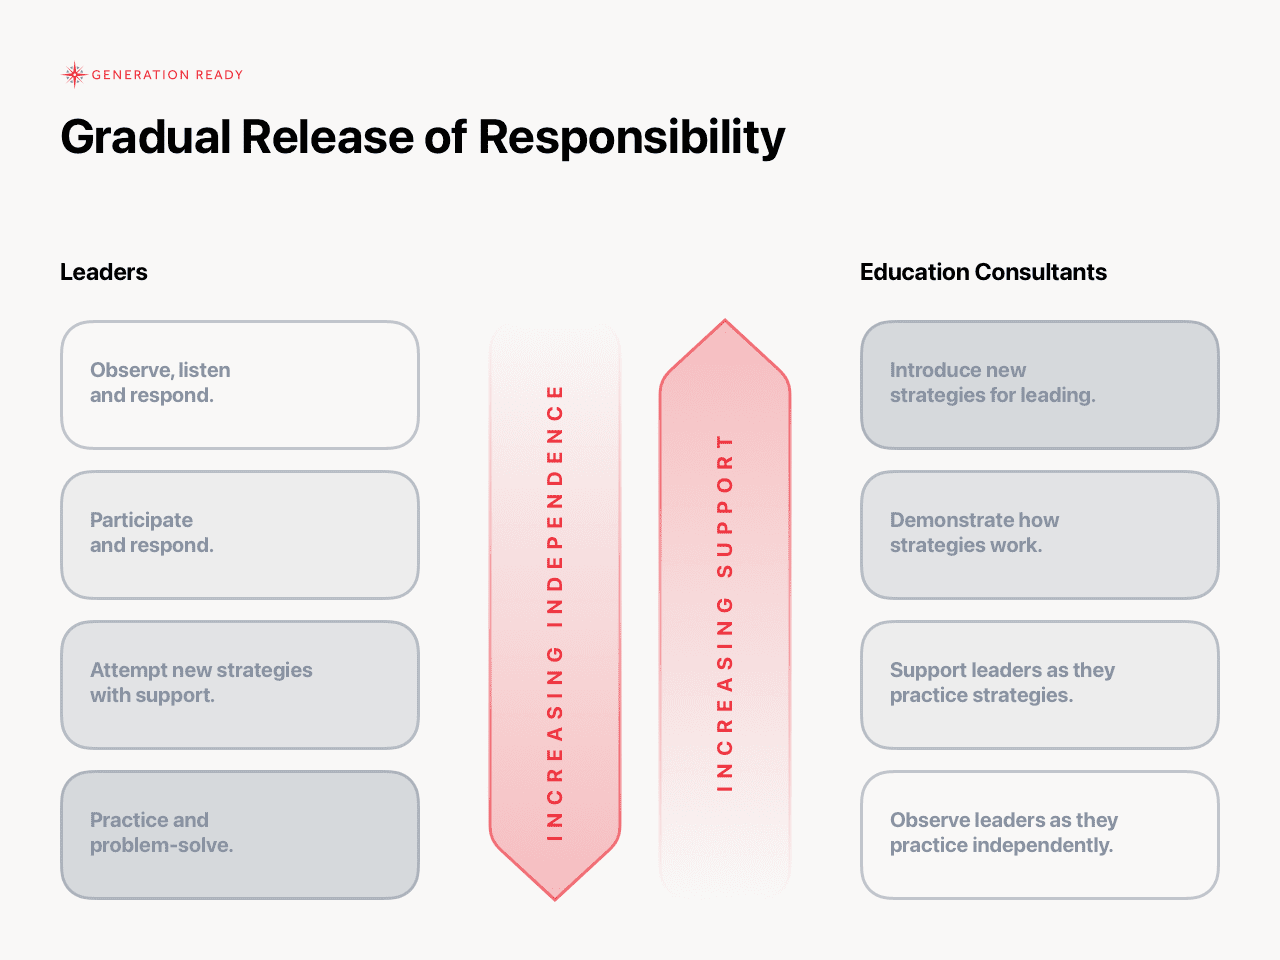 Gradual Release of Responsibility from Education Consultants to School Leaders